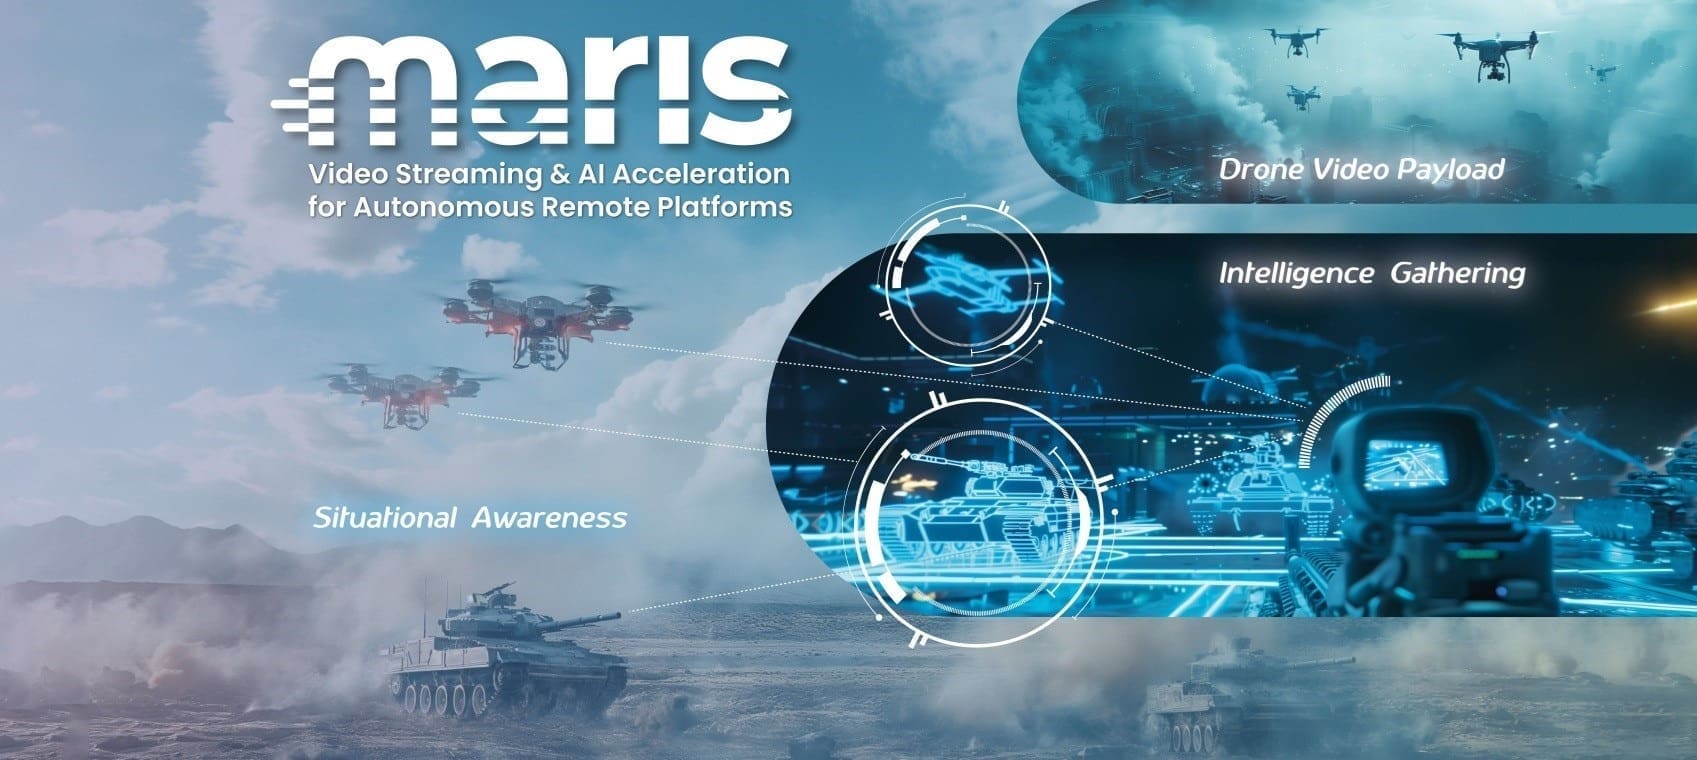 A promotional graphic for "maris" featuring a tank, drones, and surveillance equipment. Text highlights the company's focus on video streaming, AI acceleration, situational awareness, and intelligence gathering.